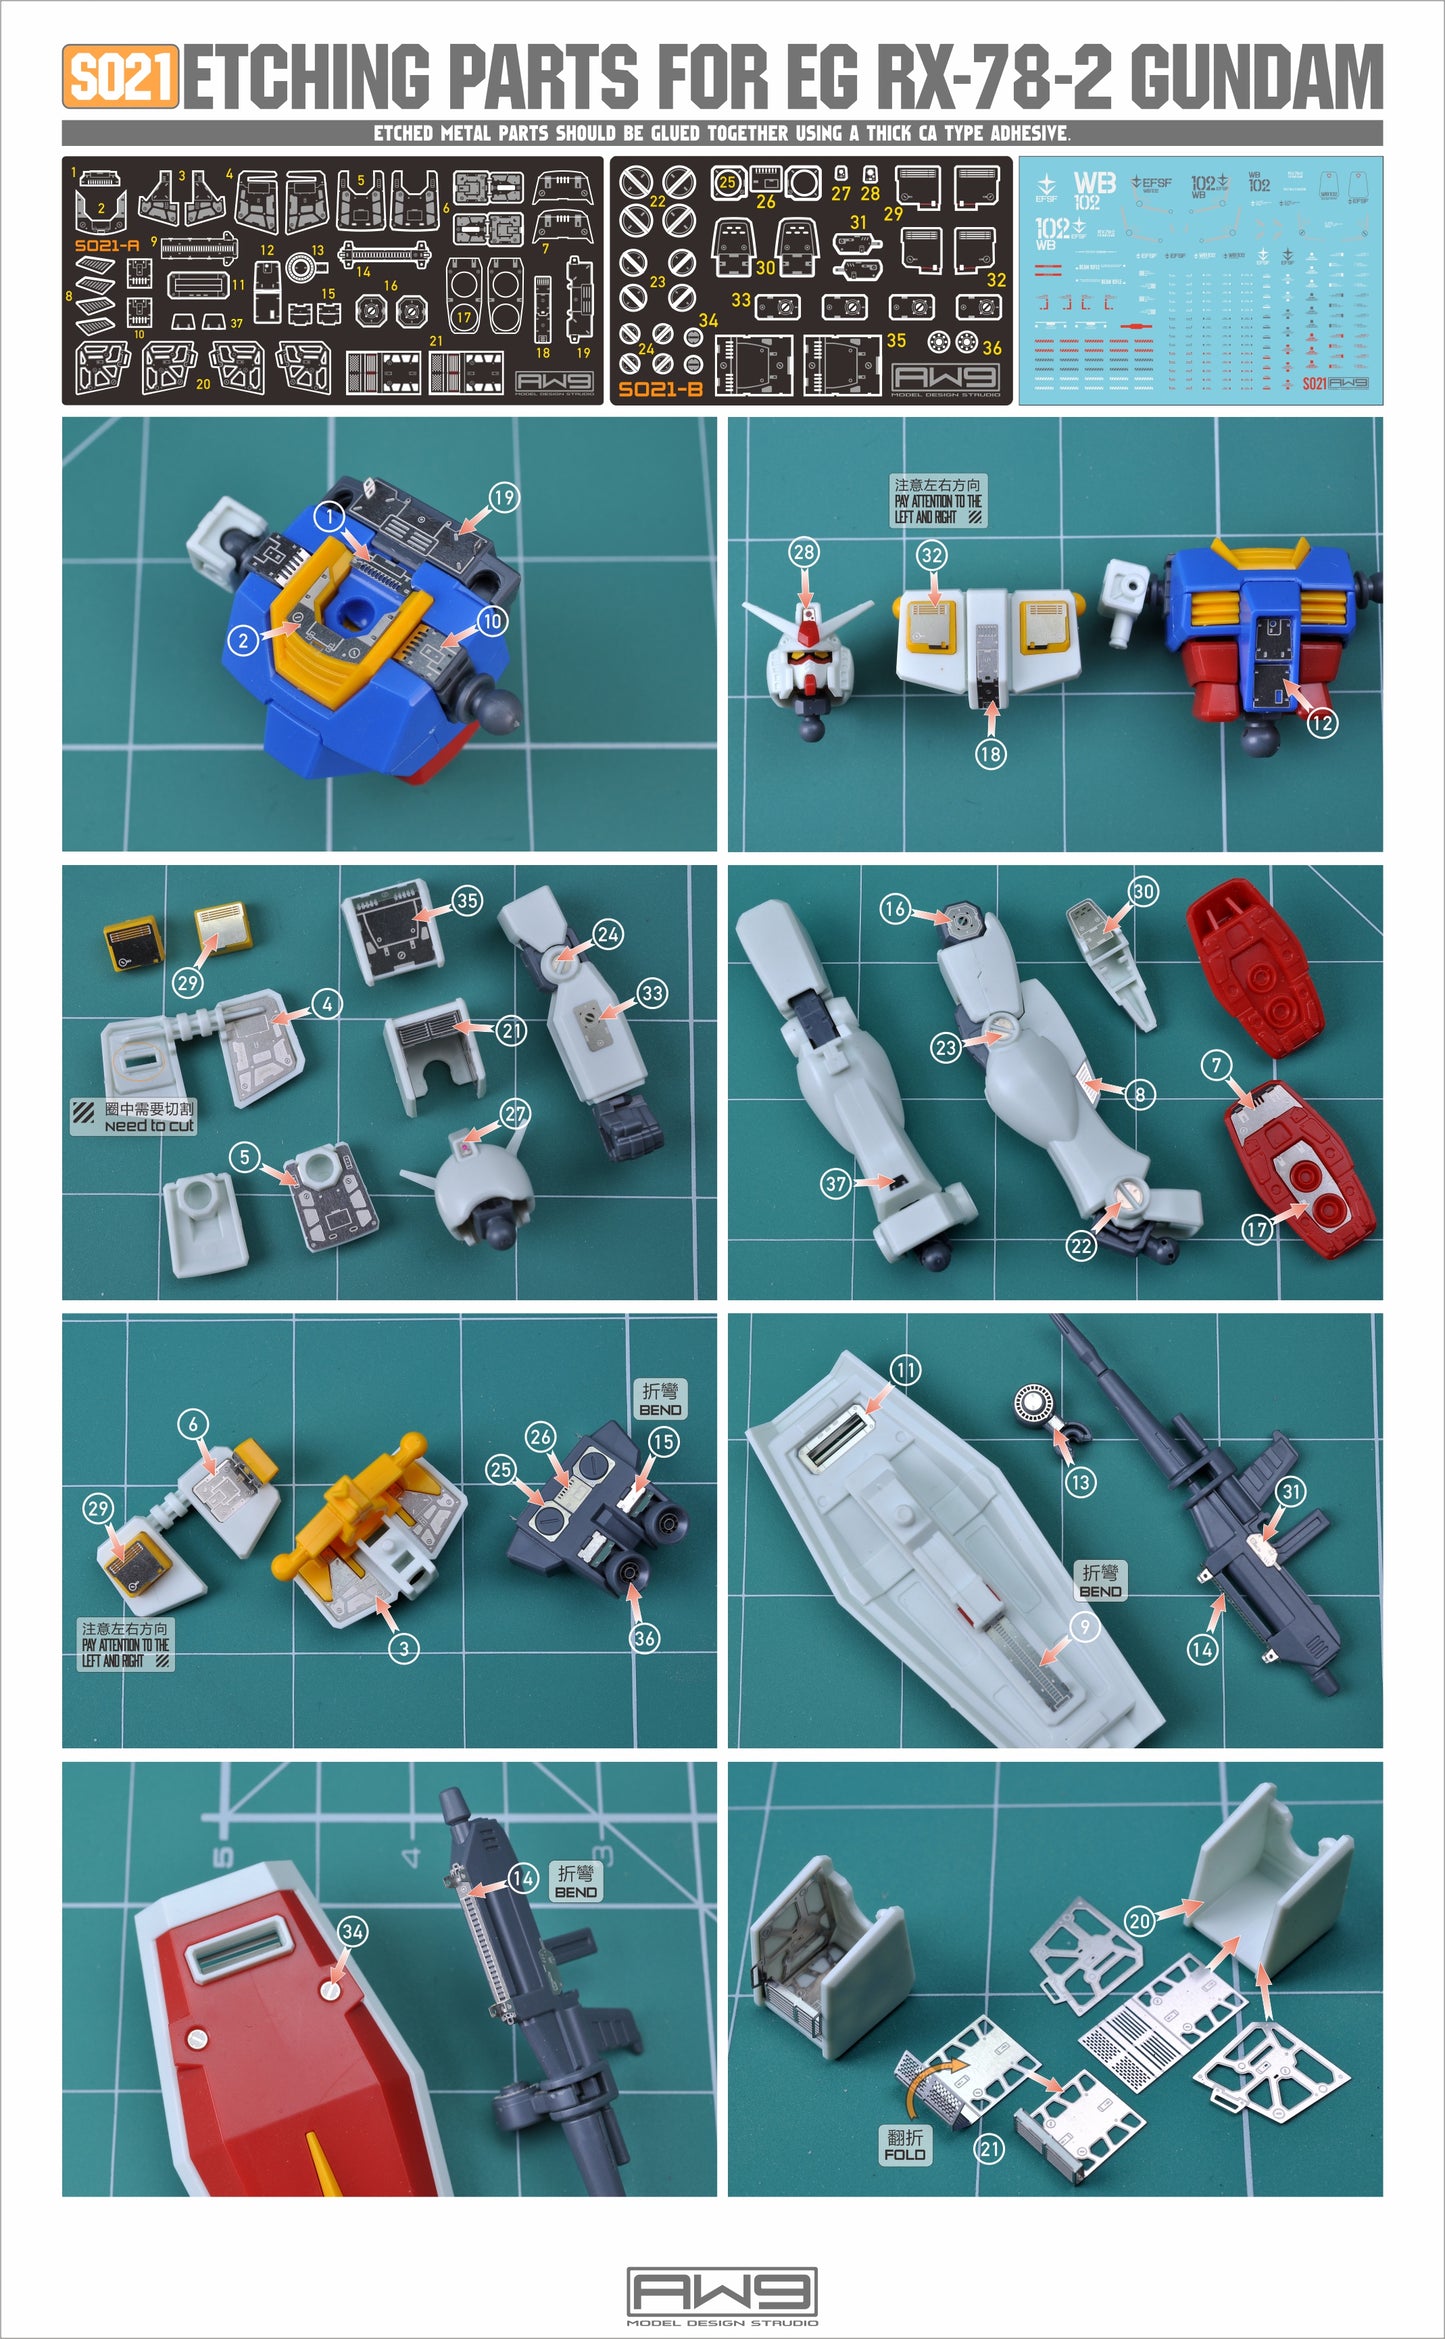 Madworks S021 Etching Parts for EG RX78-2 Gundam